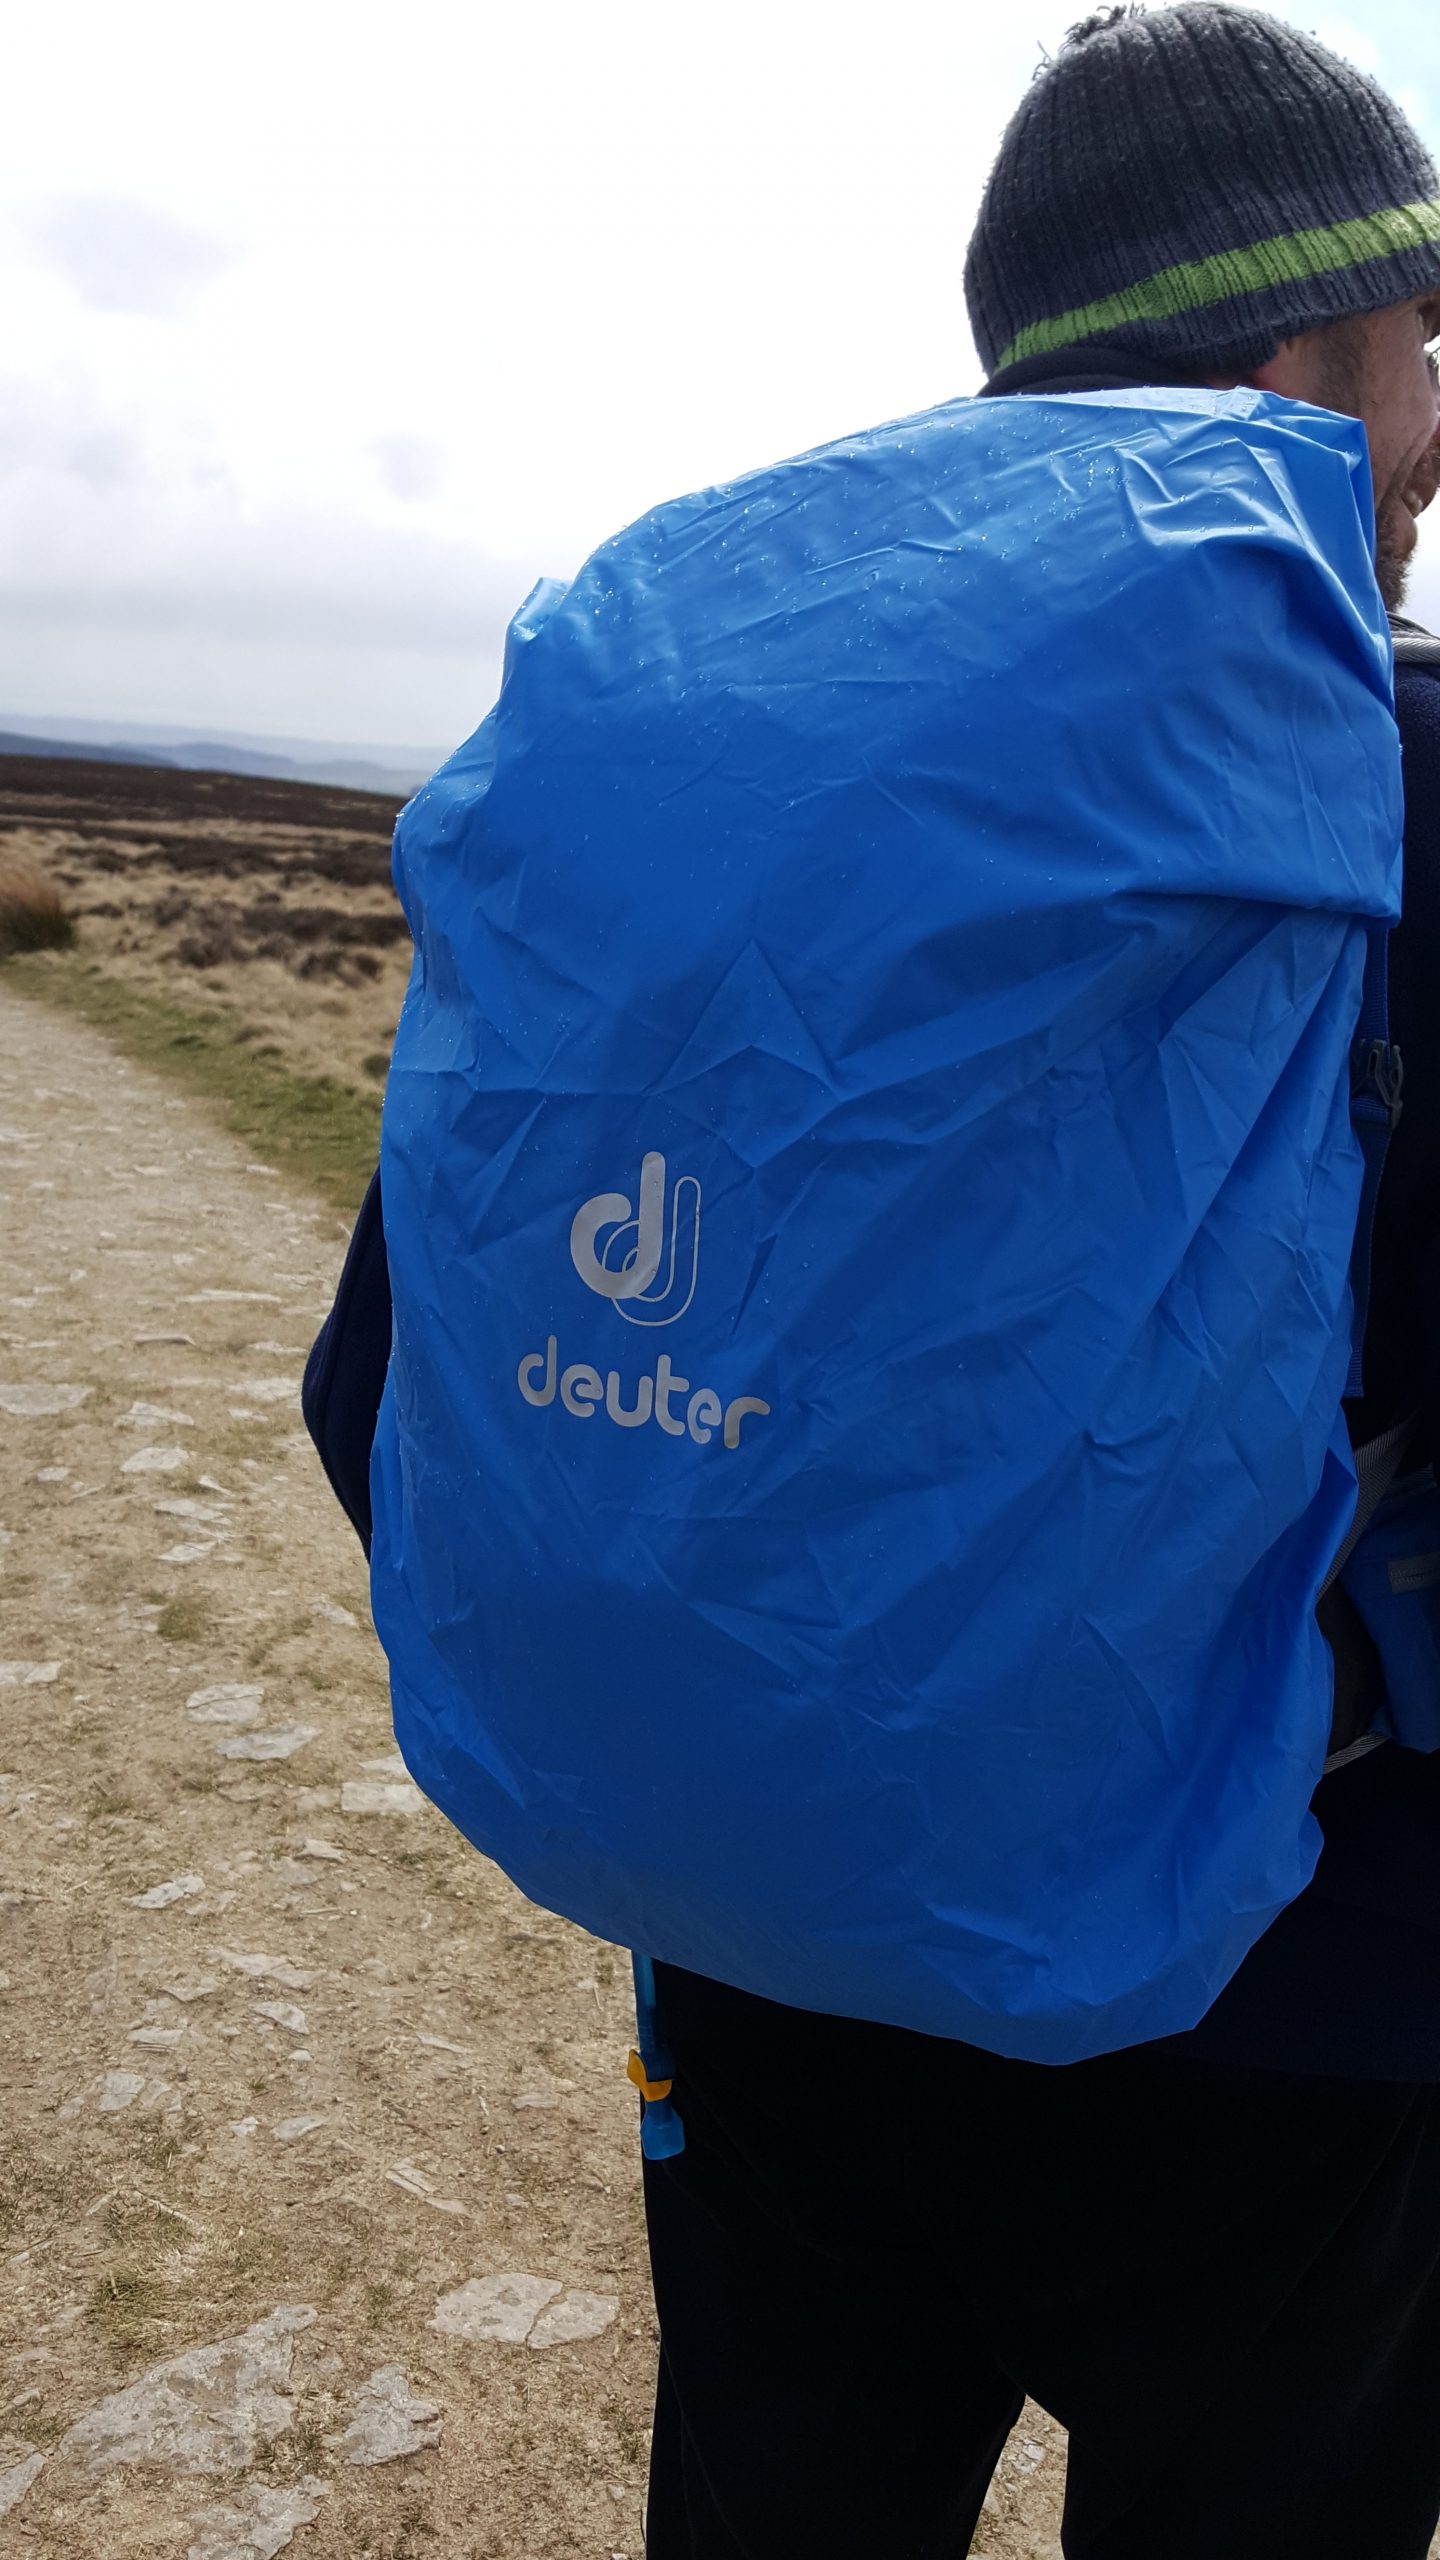 DEUTER HELIUM RUCKSACK REVIEW: IDEAL FOR SHORT DAY TRIPS